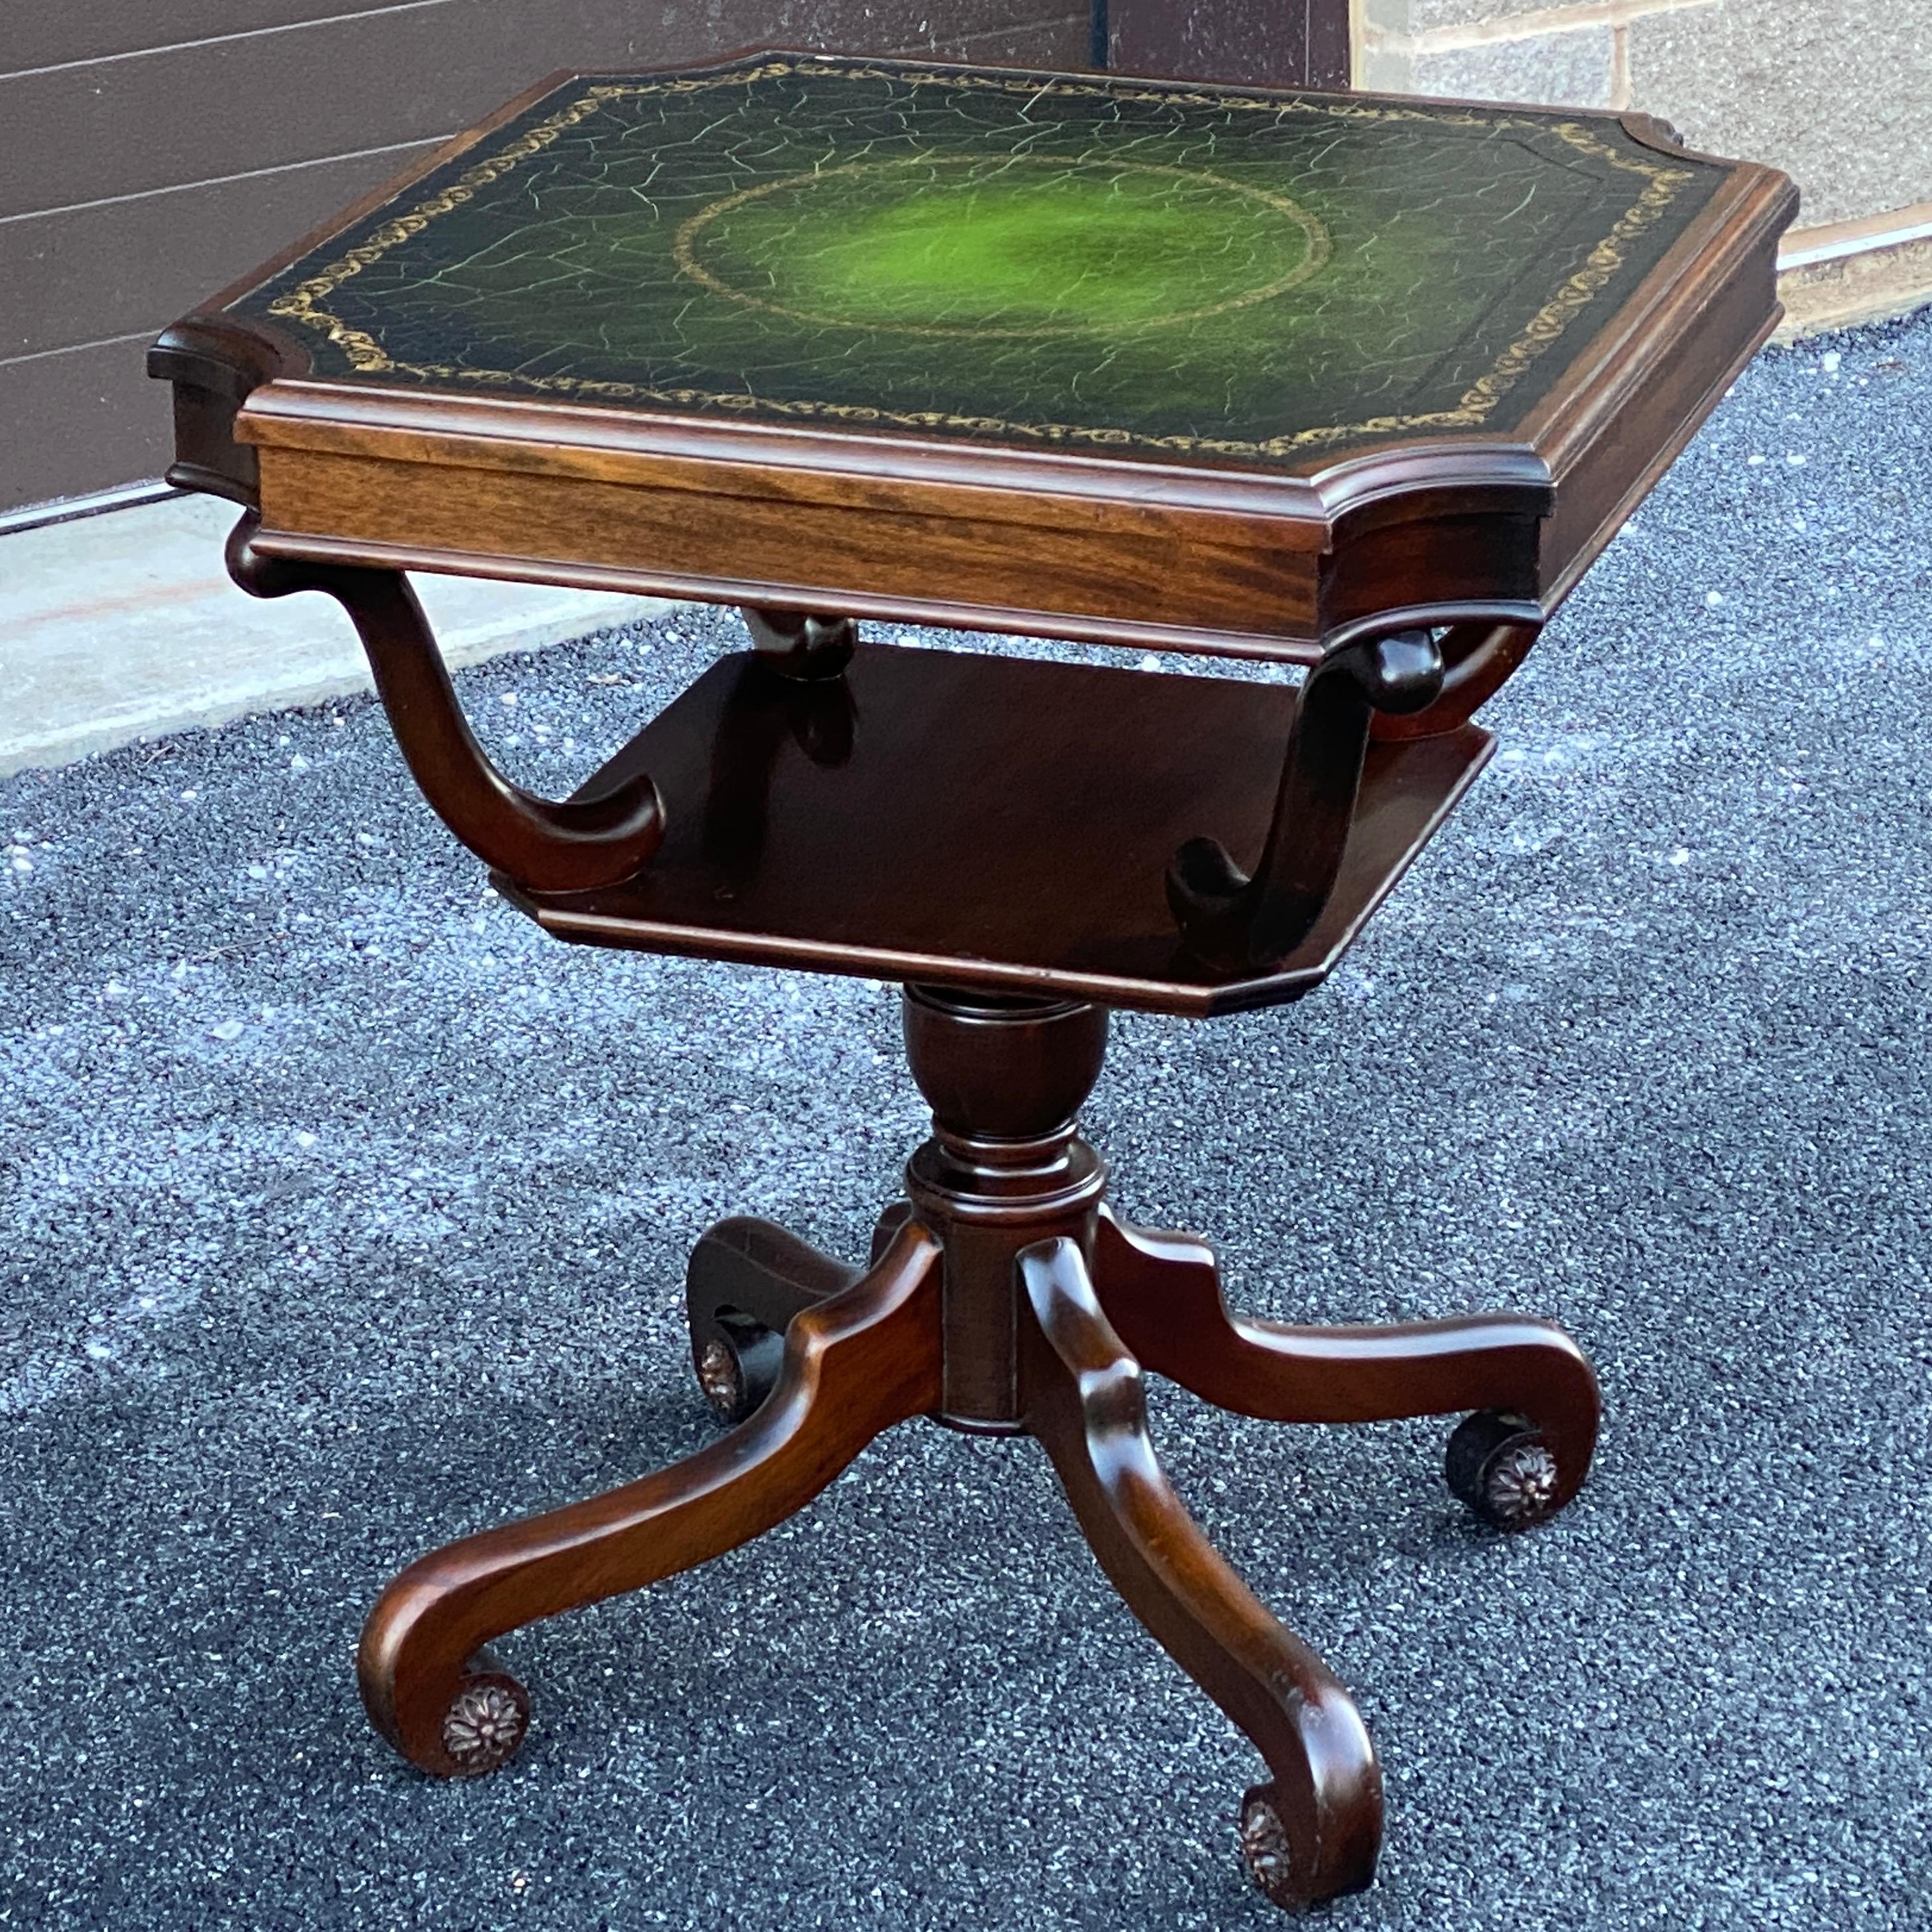 Regency Mahogany Scroll Foot Center Table With Tooled Green Leather Top In Good Condition For Sale In West Chester, PA